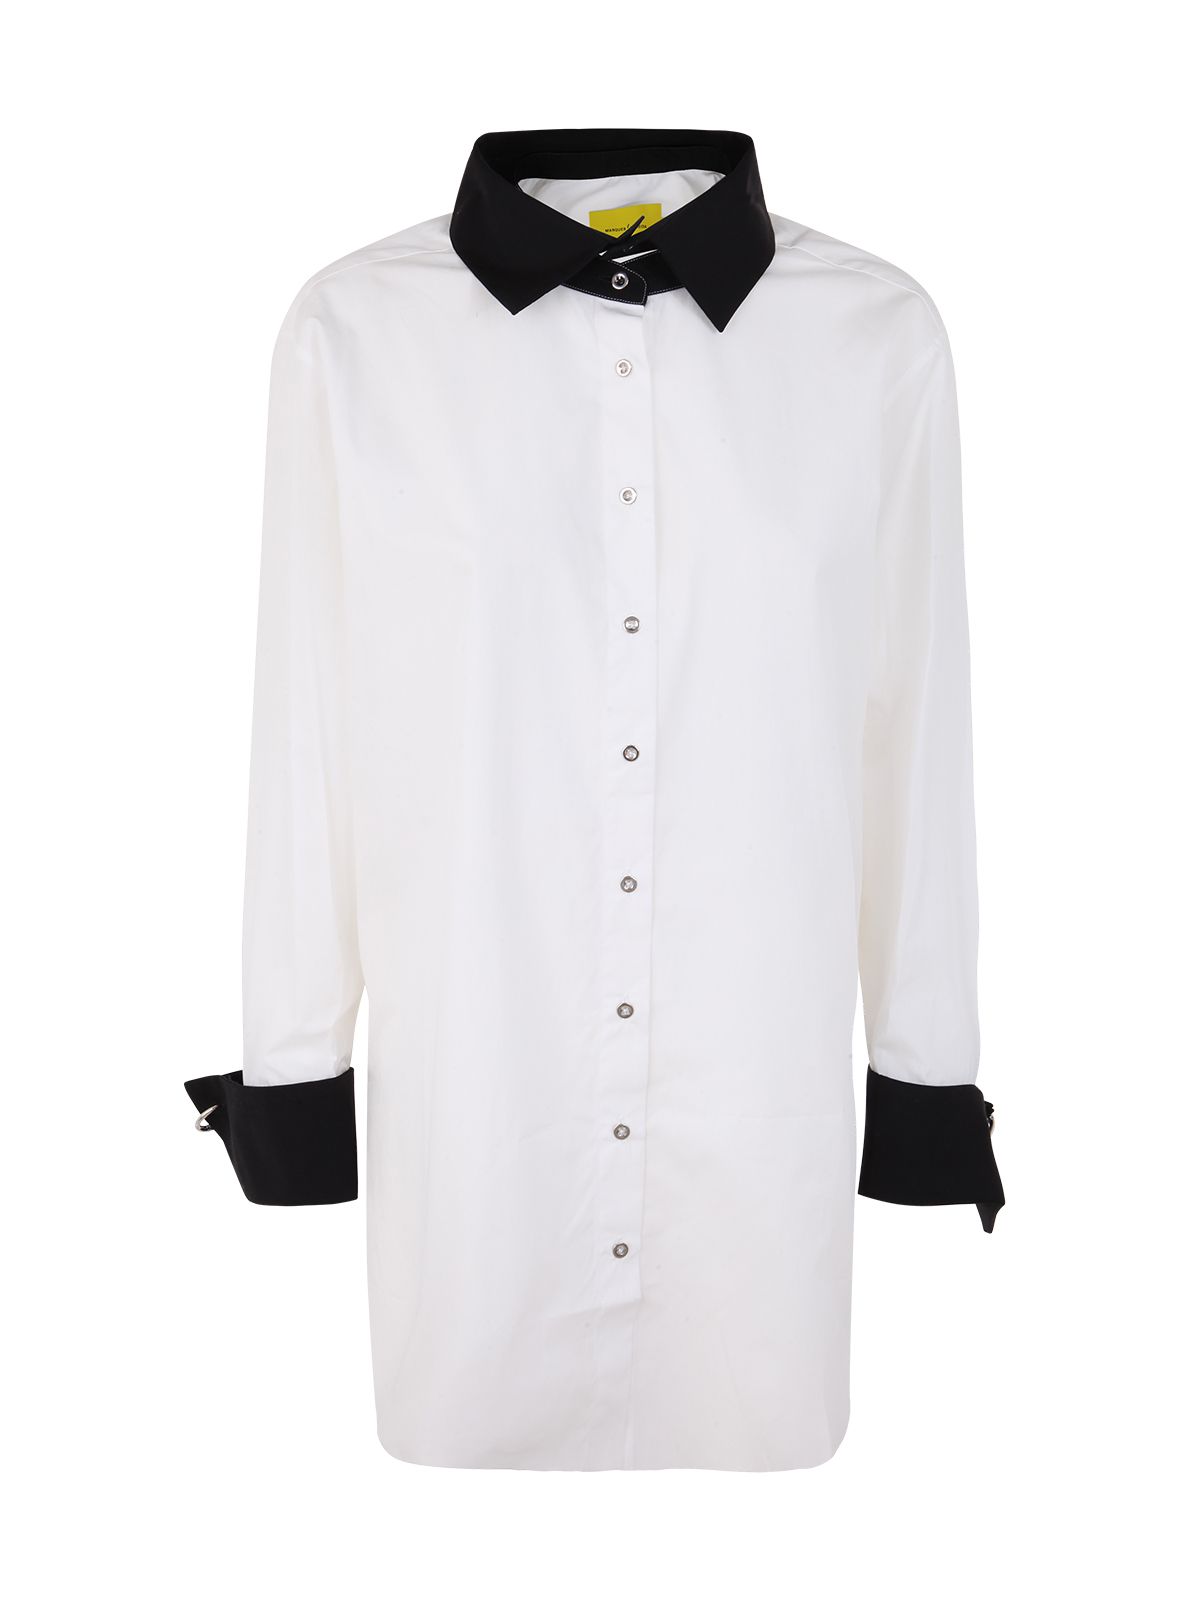 Marques' Almeida Shirt With Detachable Cuffs And Collar In Black/white